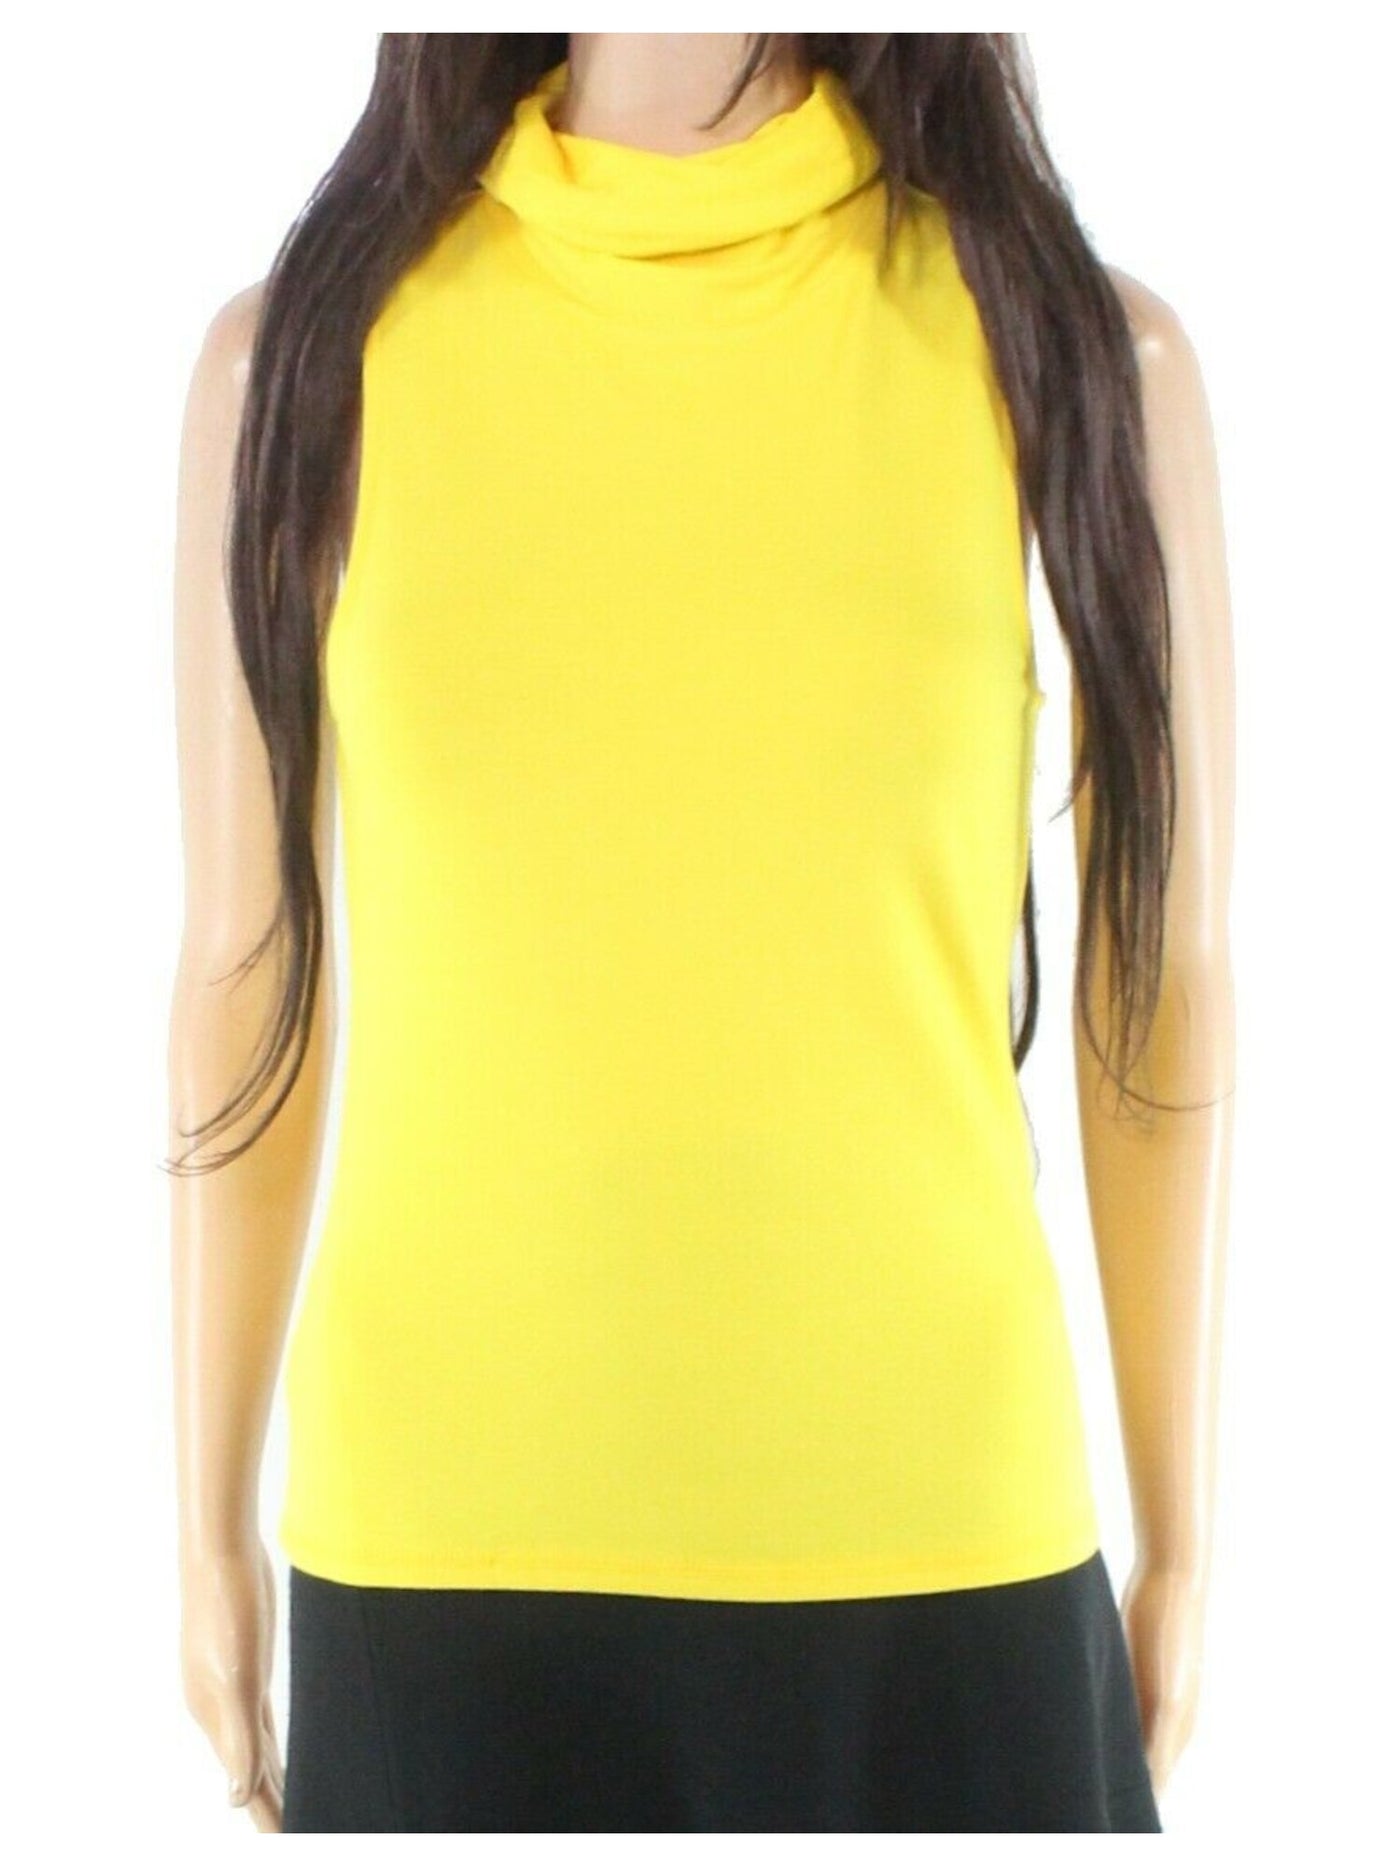 BAM BY BETSY & ADAM Womens Yellow Cotton Blend Sleeveless Scoop Neck Wear To Work Tank Top S